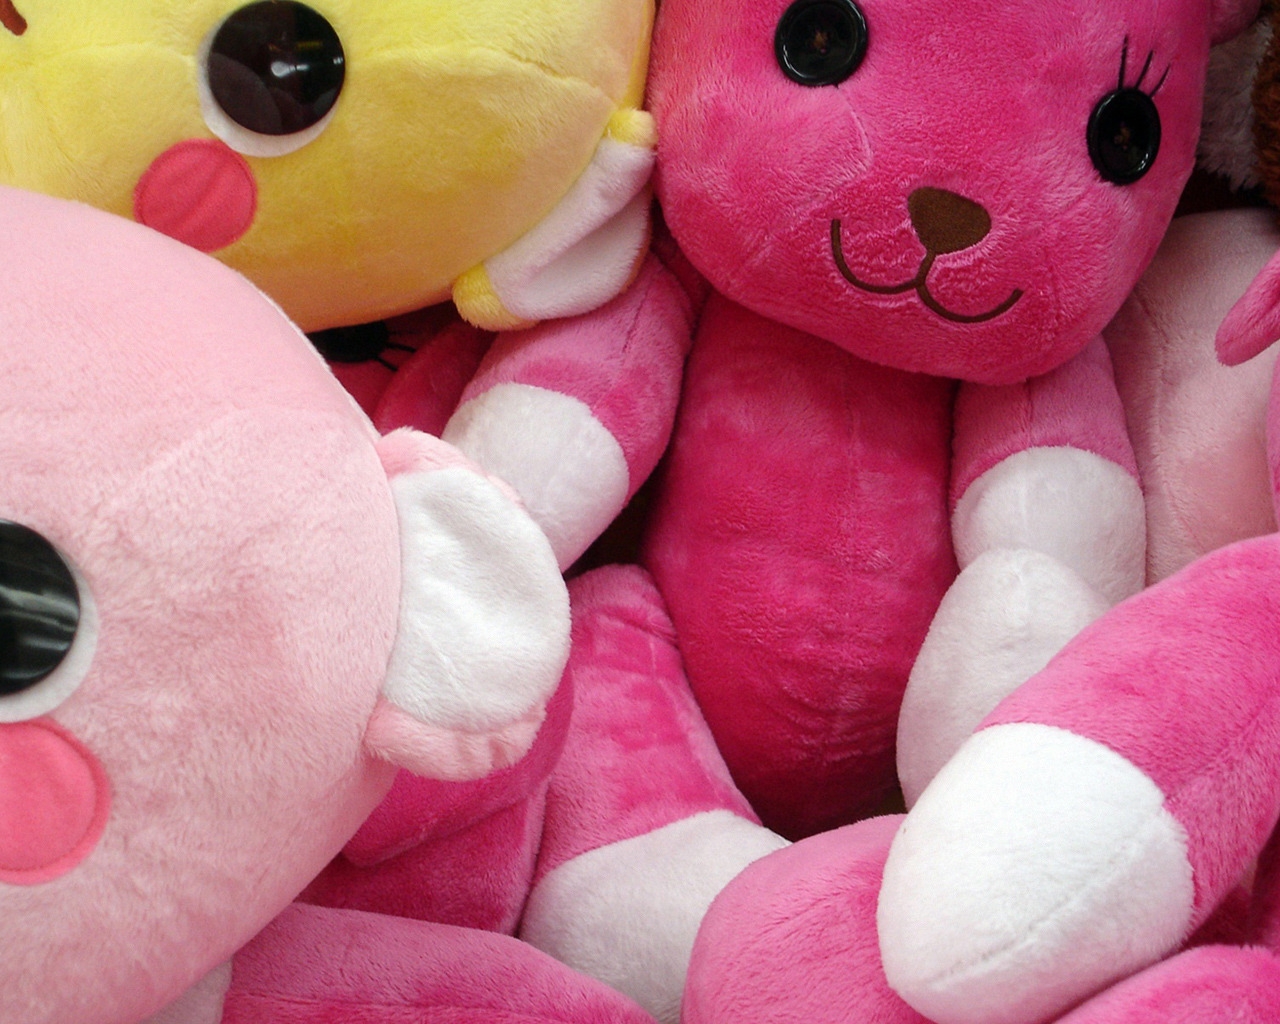 Pink Teddy Bears for 1280 x 1024 resolution